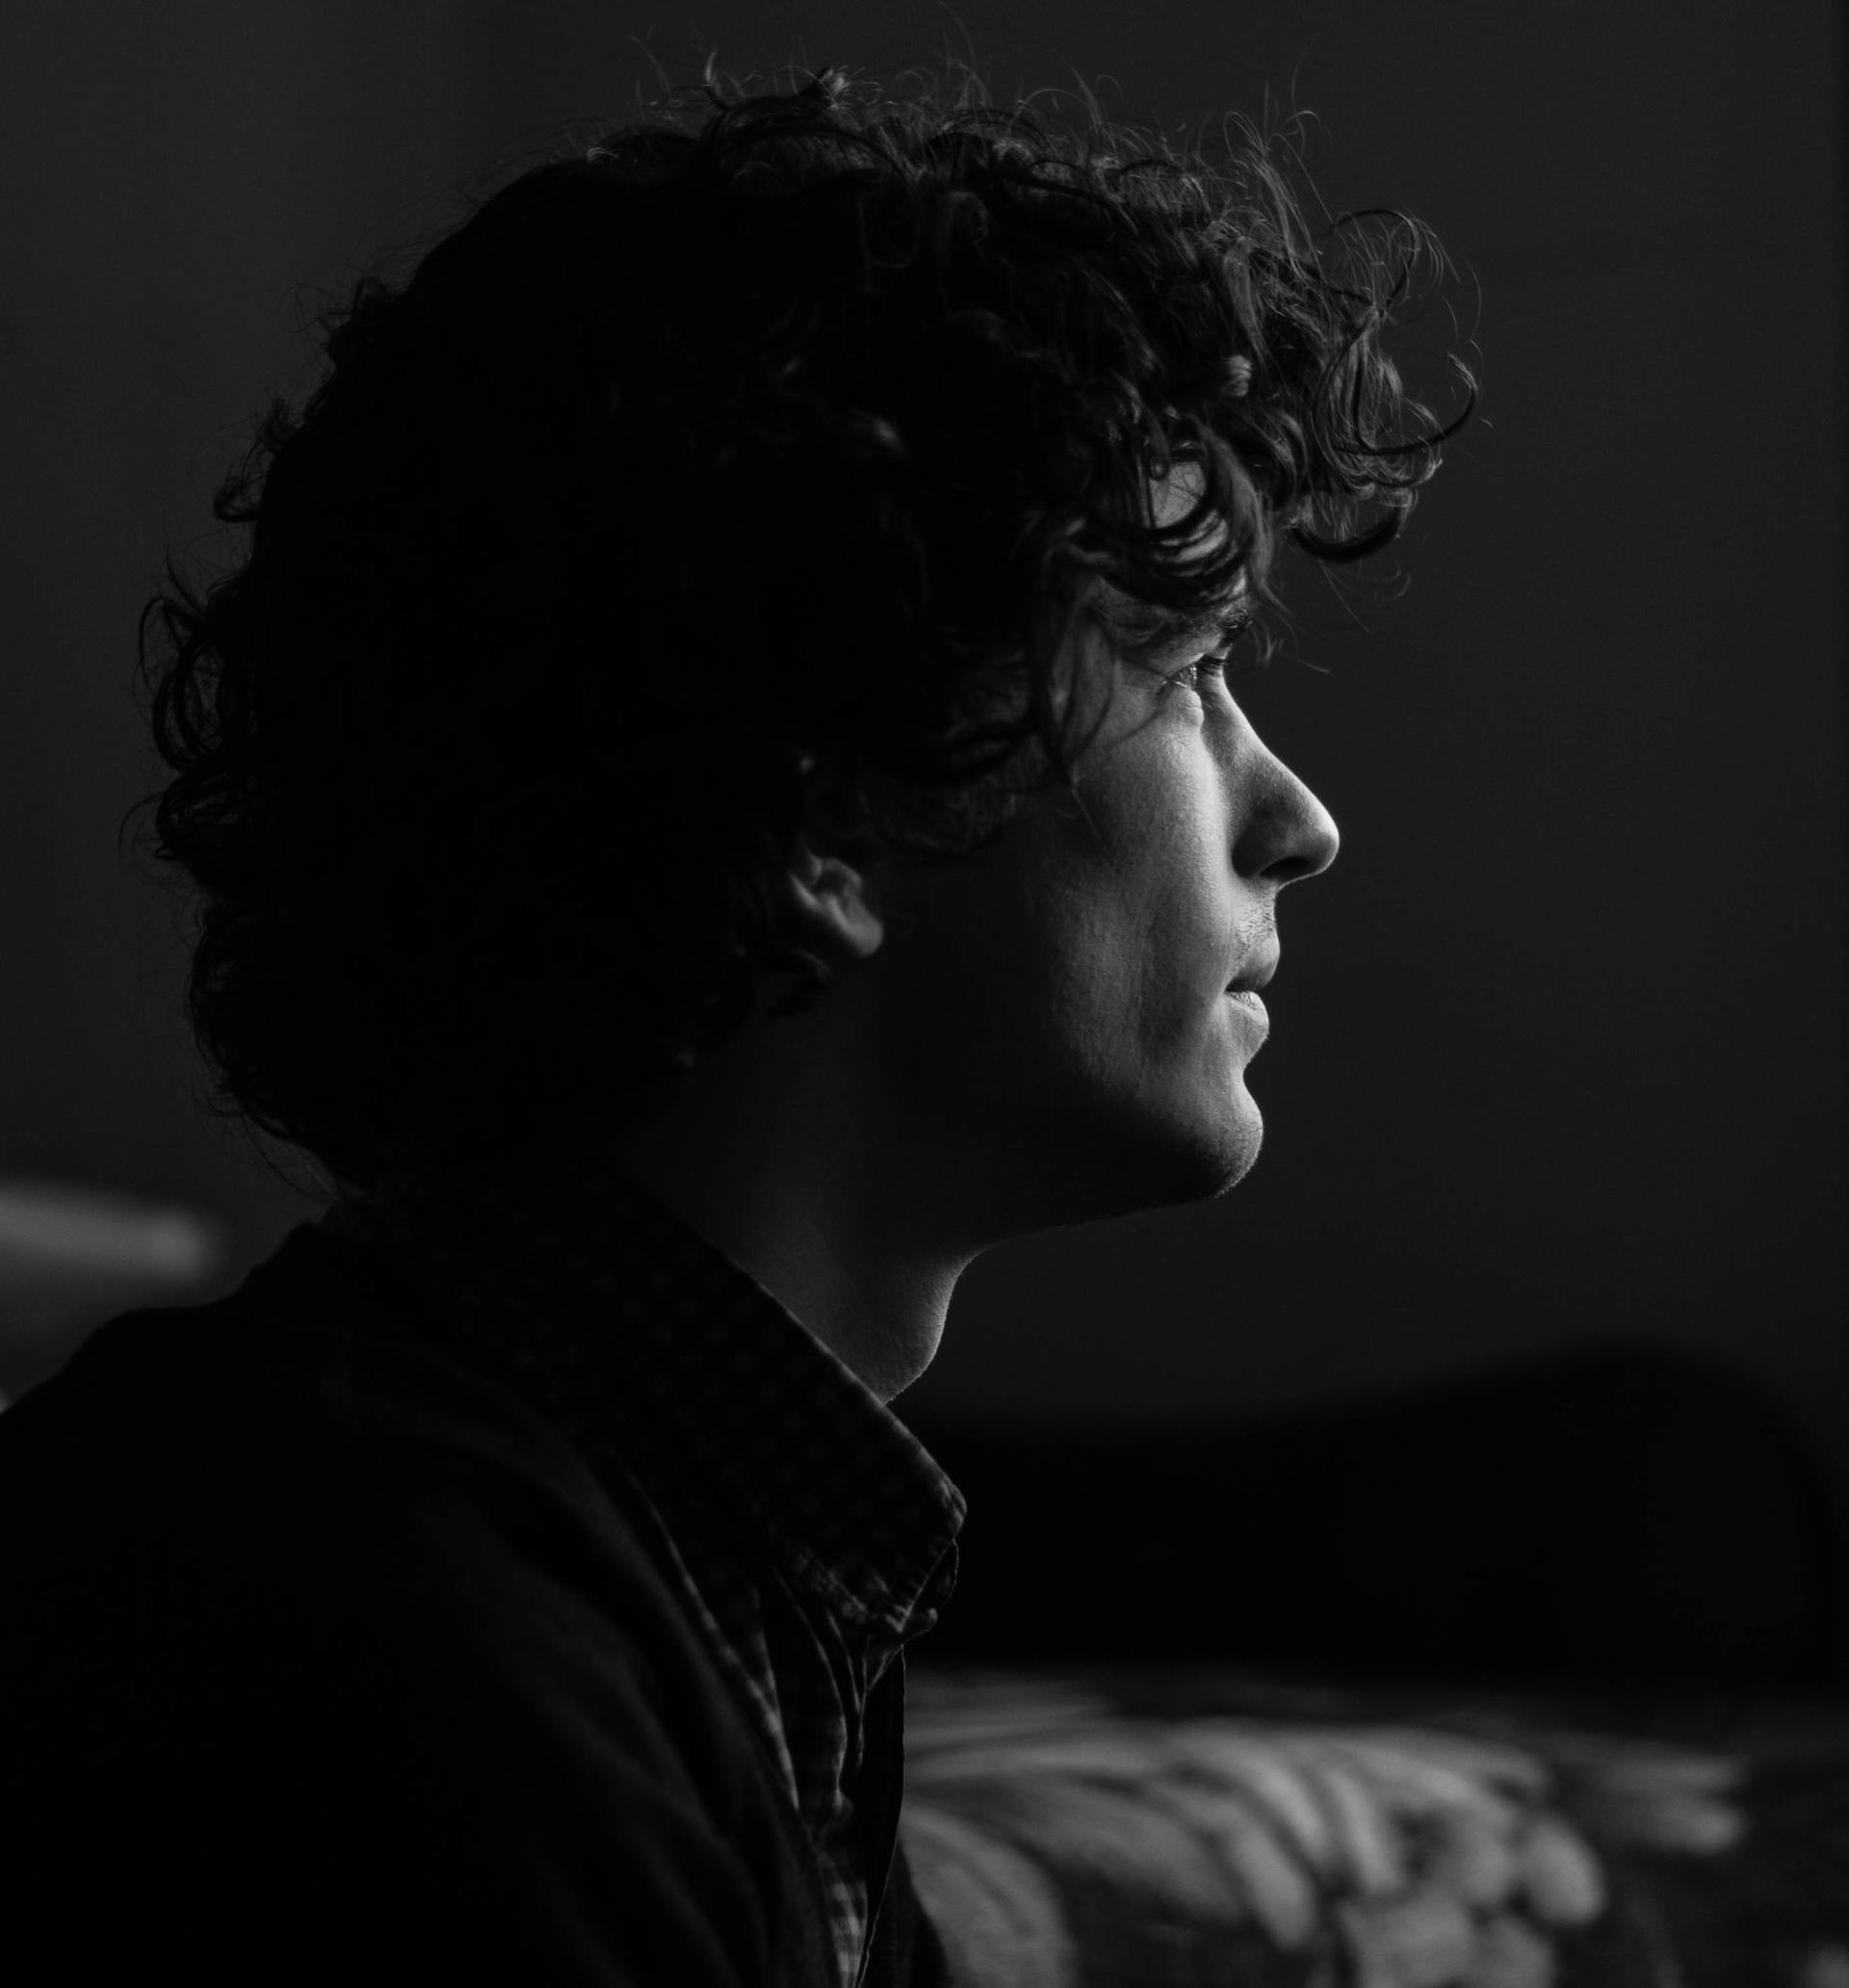 A grayscale photo of a young man's side view | Source: Pexels